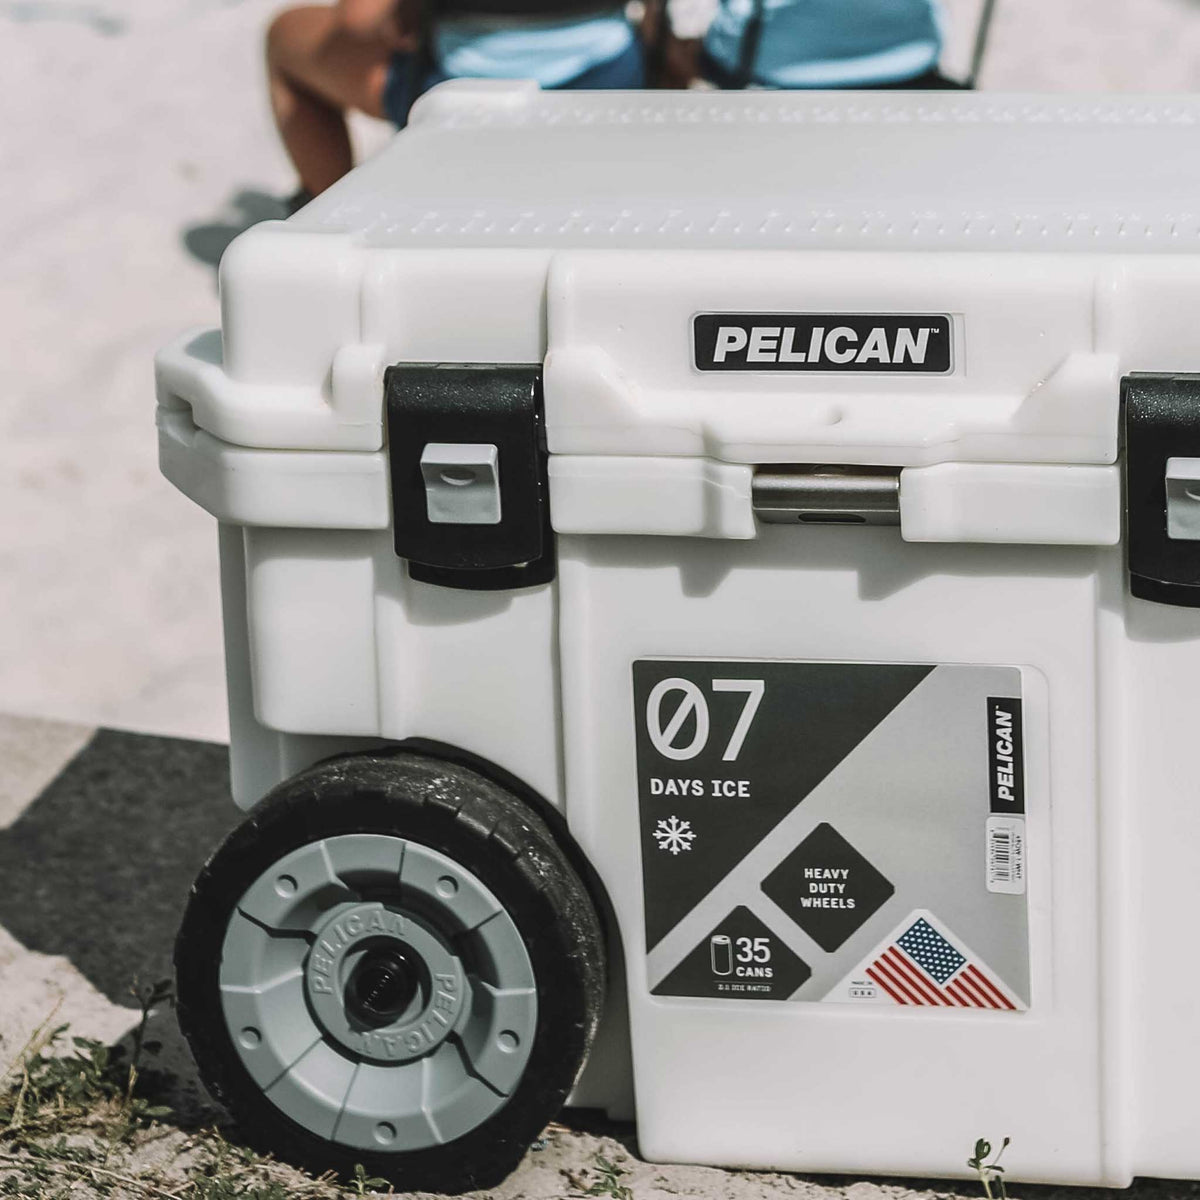 Pelican 45QT Elite Wheeled Cooler being used at the beach